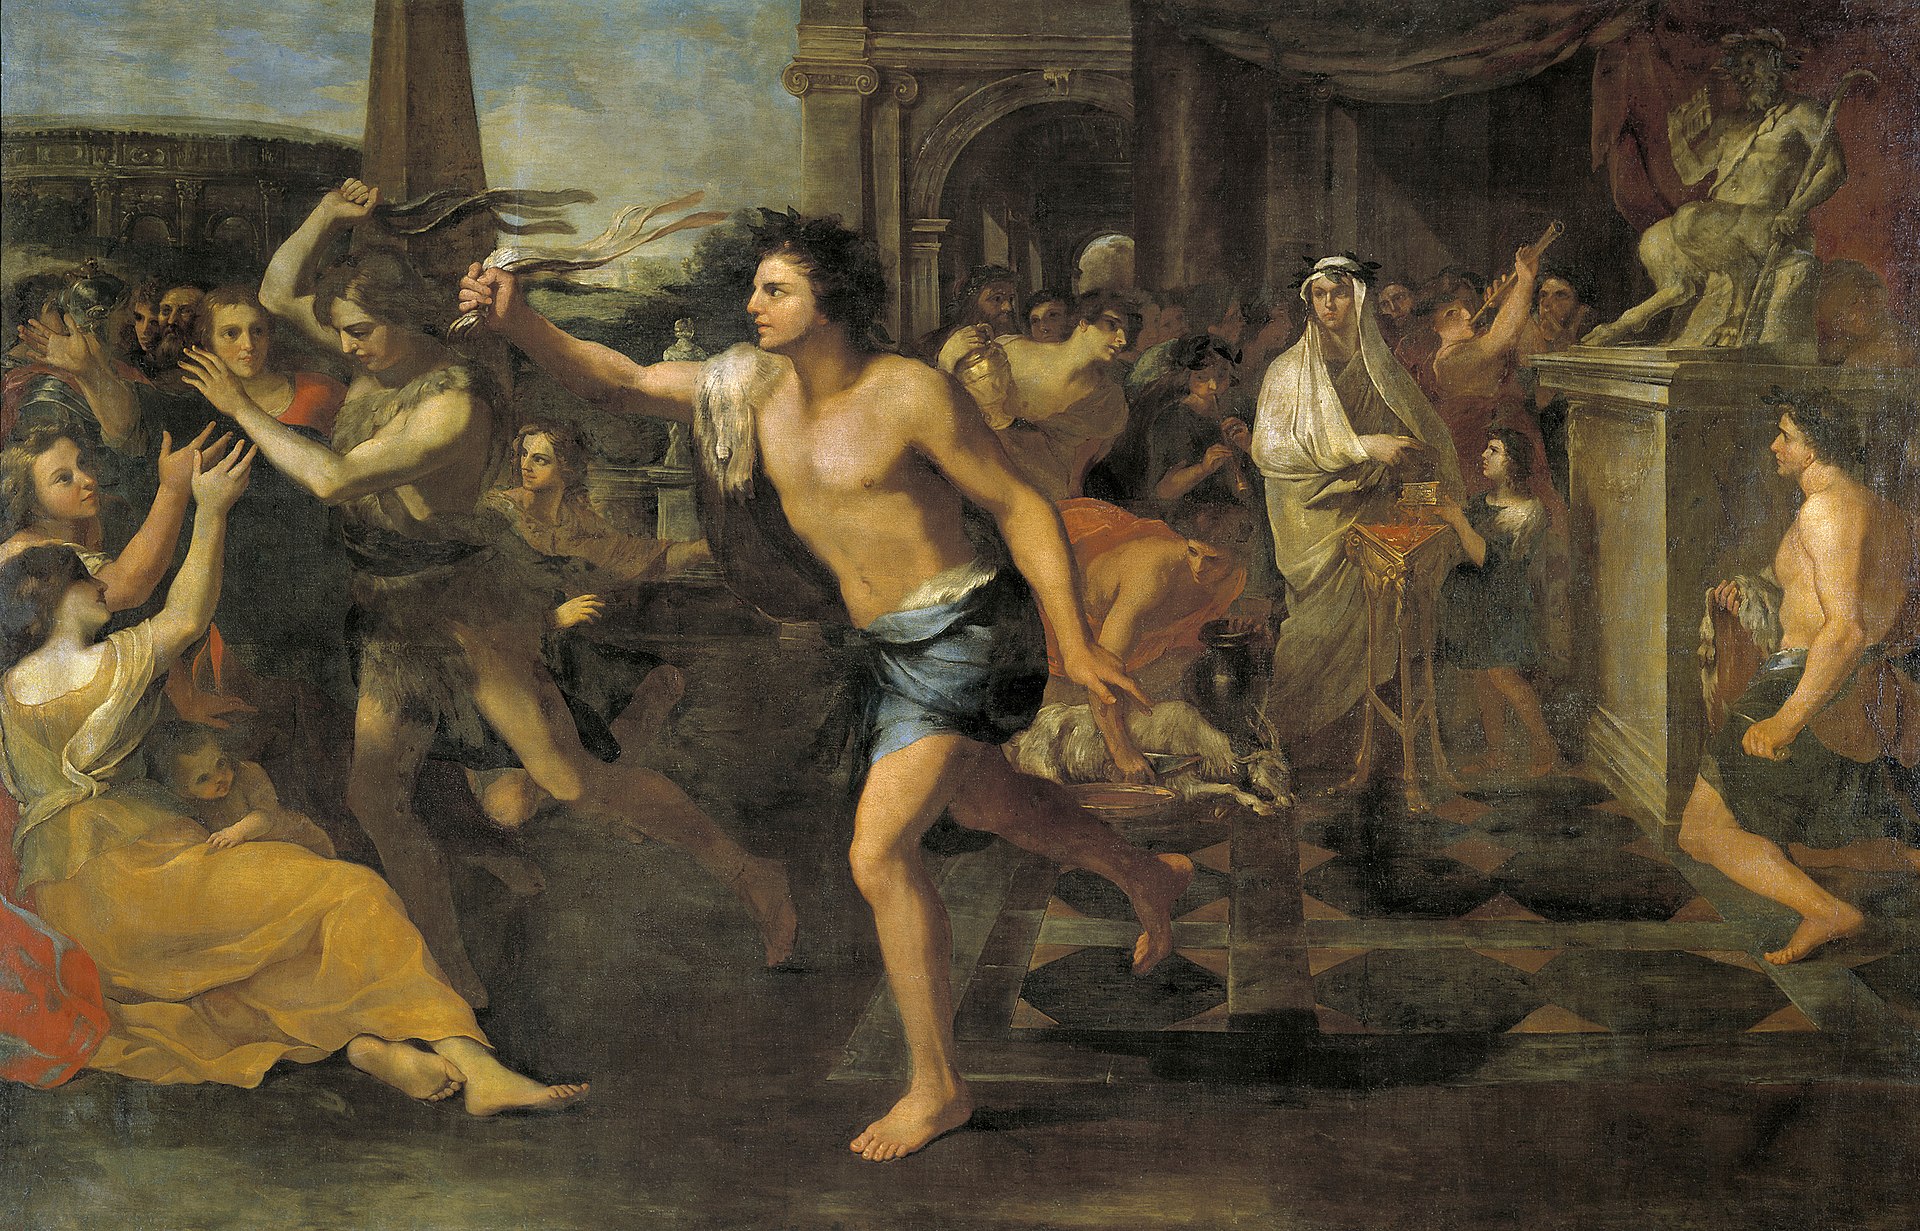 ancient roman party with people running around with thongs